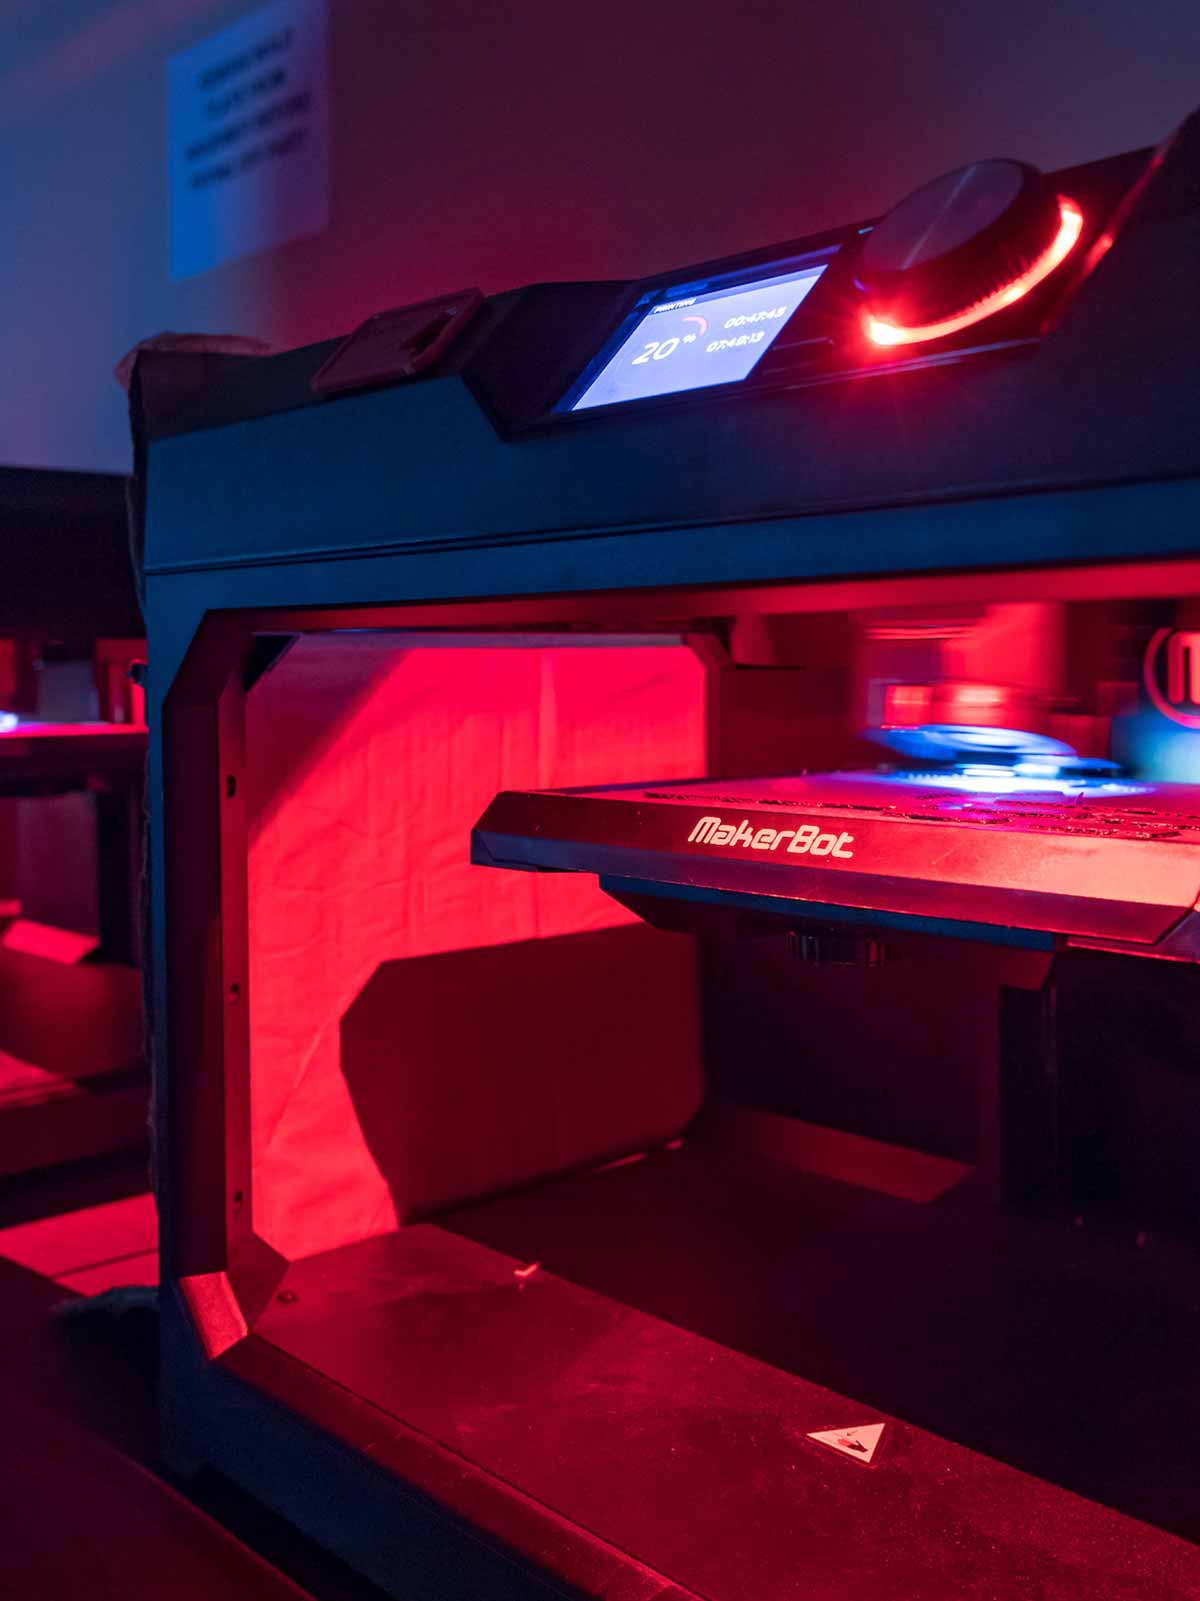 3D printers glow a pinkish red color in Fitzpatrick Hall of Engineering.